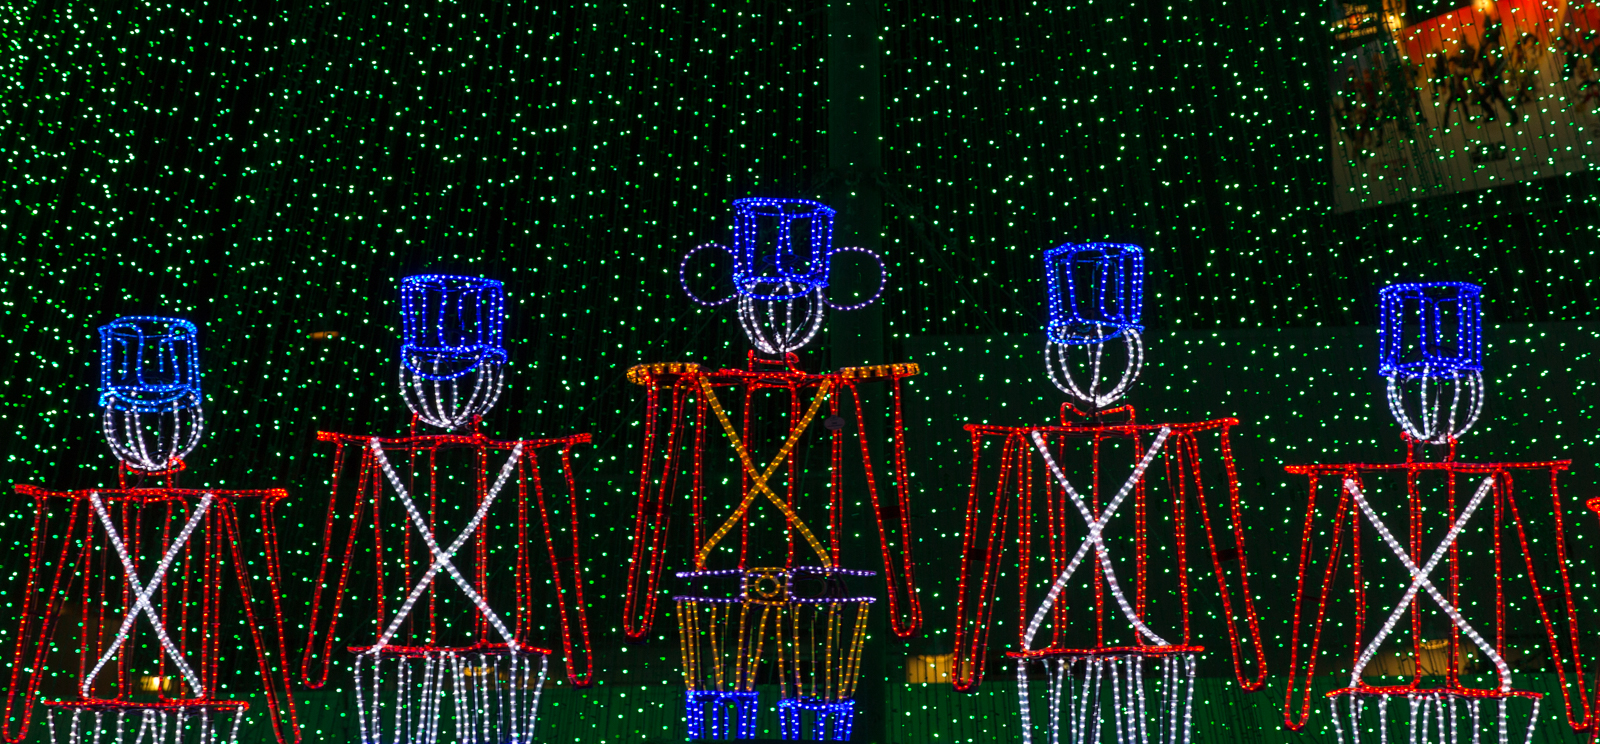 Toy Soldier Mickey, The Osborne Family Spectacle of Dancing Lights, Hollywood Studios, Orlando, Florida